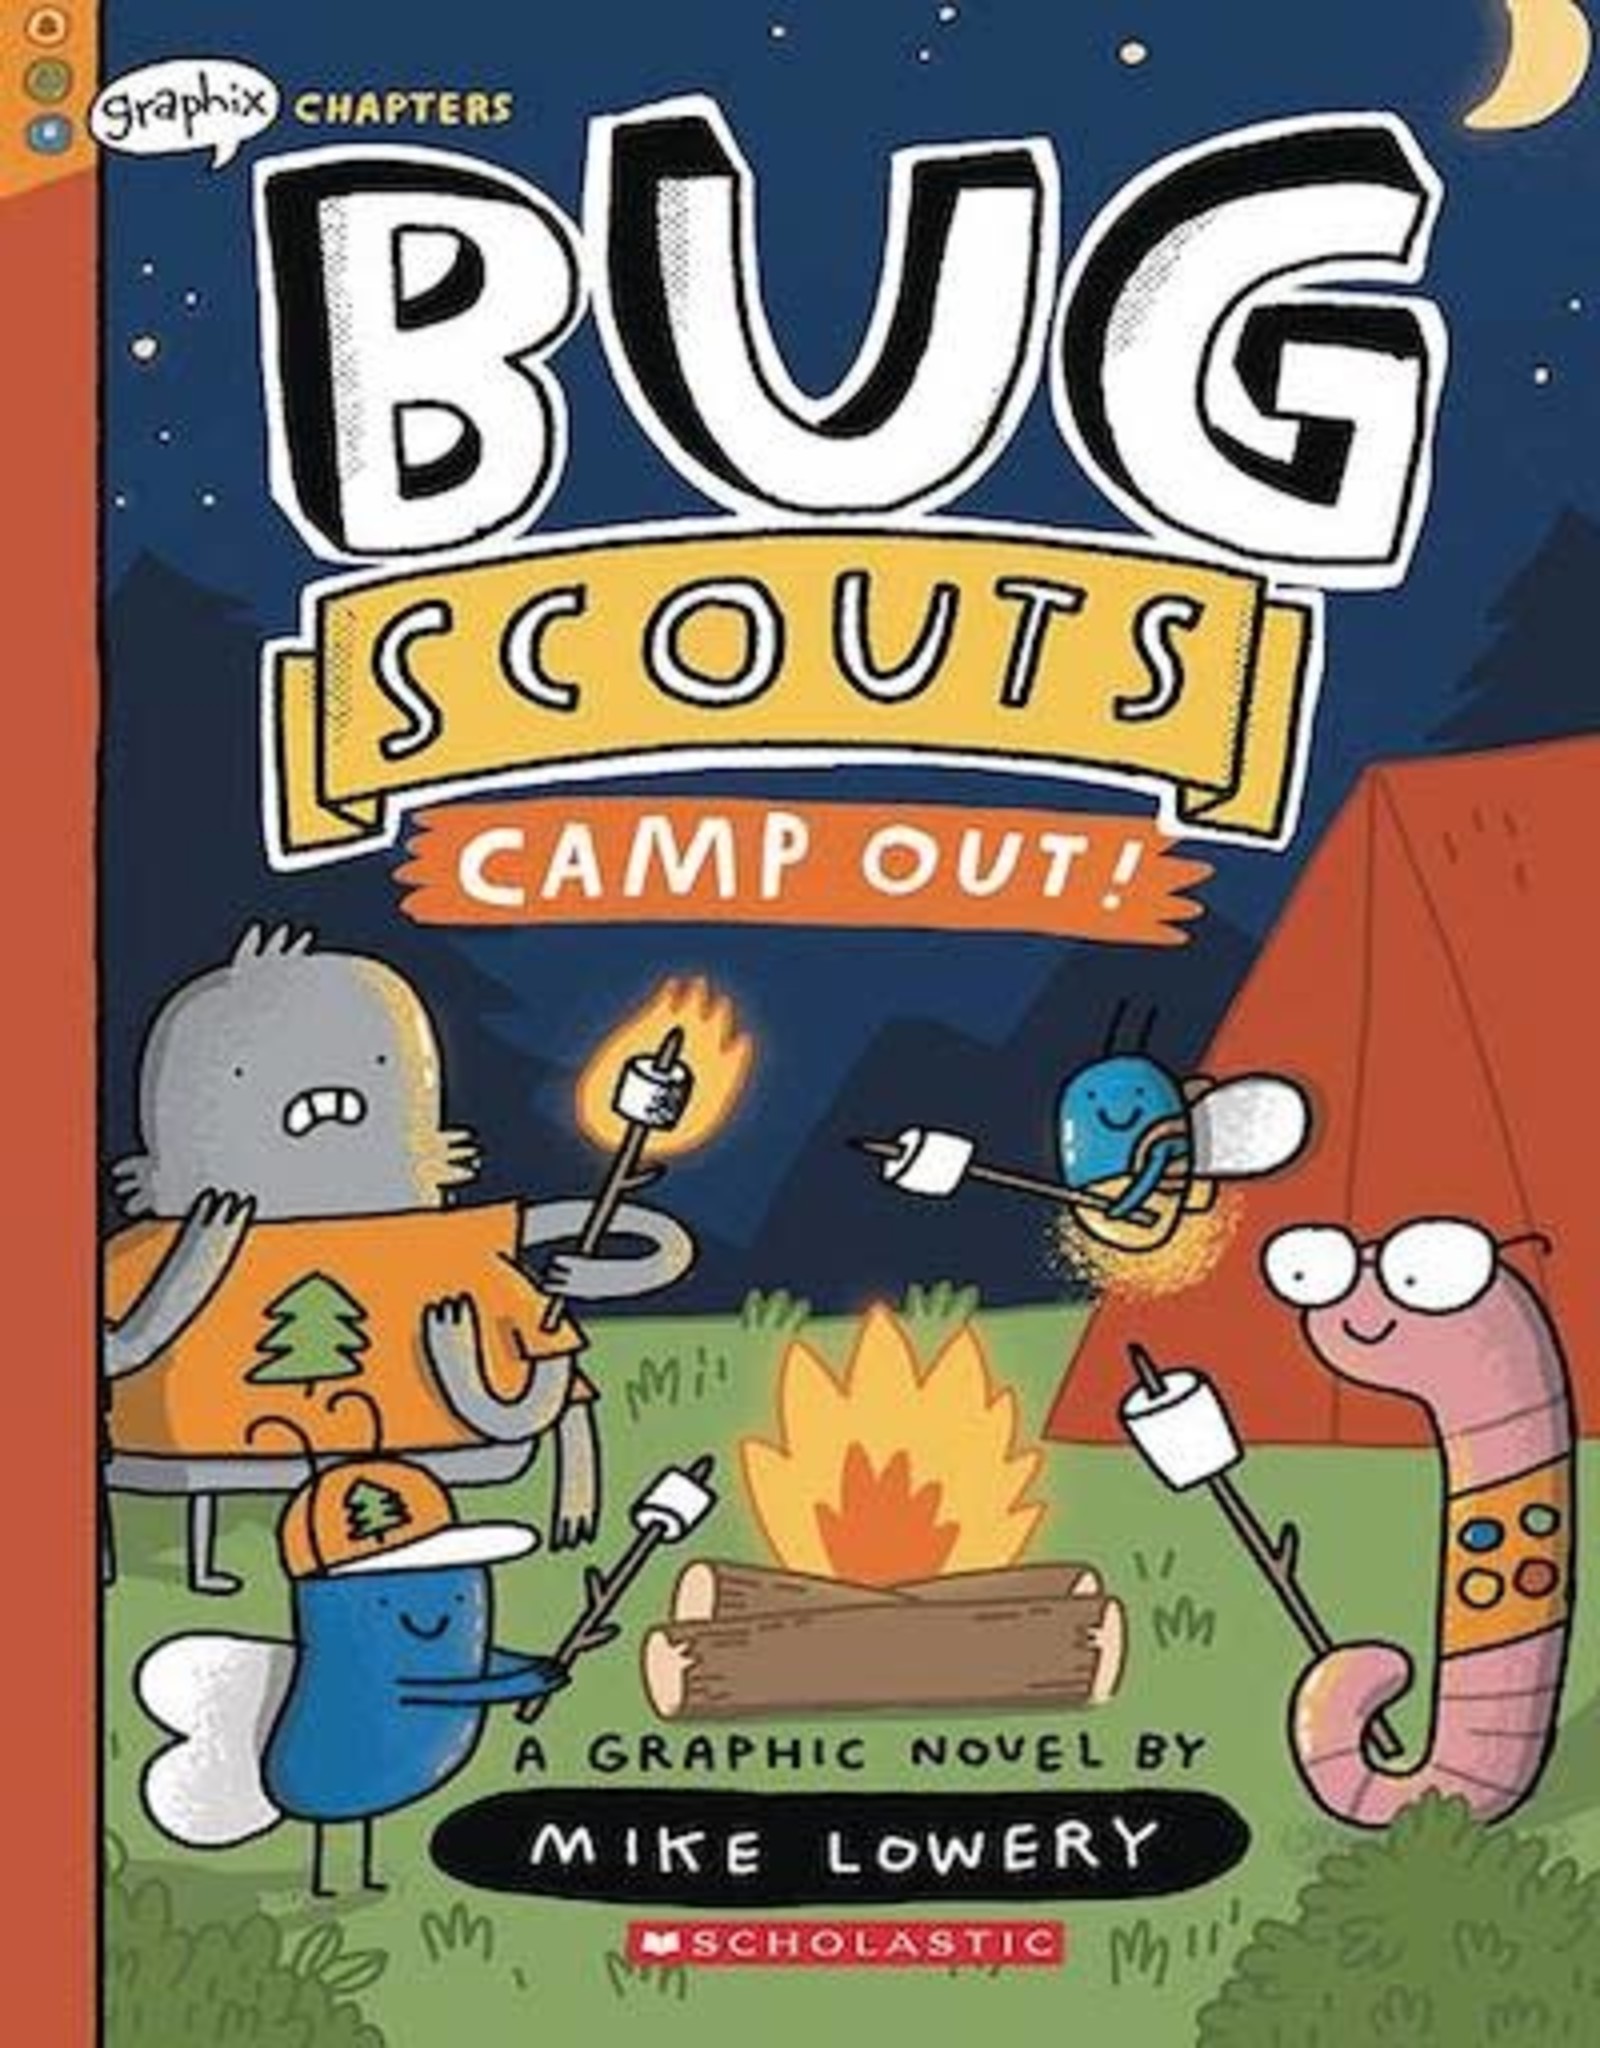 Graphix Chapters Bug Scouts GN Vol 02 Camp Out